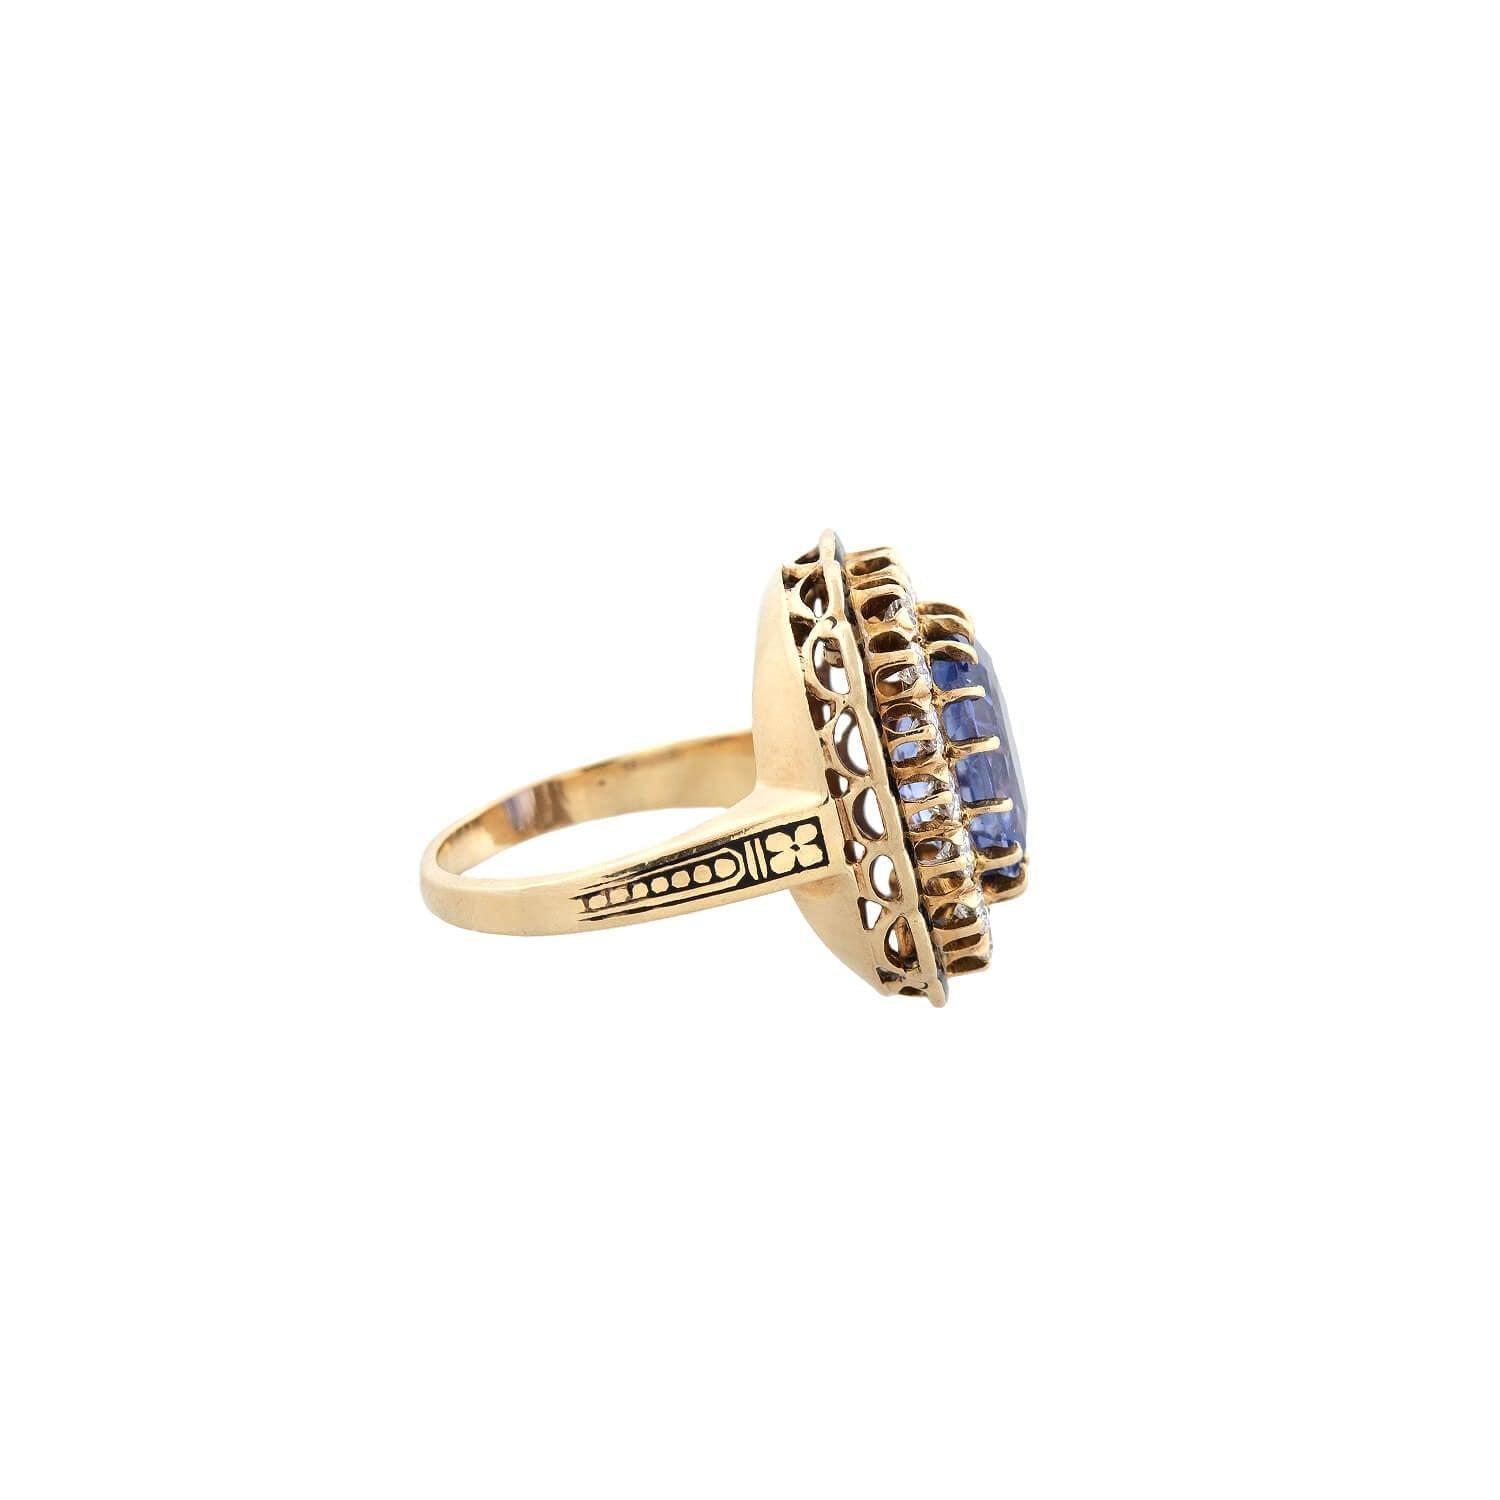 An incredible sapphire and diamond ring from the Art Deco (ca1930s) era! Crafted in 14kt yellow gold, this ring adorns a breathtaking natural, no-heat Cushion Cut Ceylon Sapphire. The elongated sapphire exhibits a wonderful cornflower blue hue and